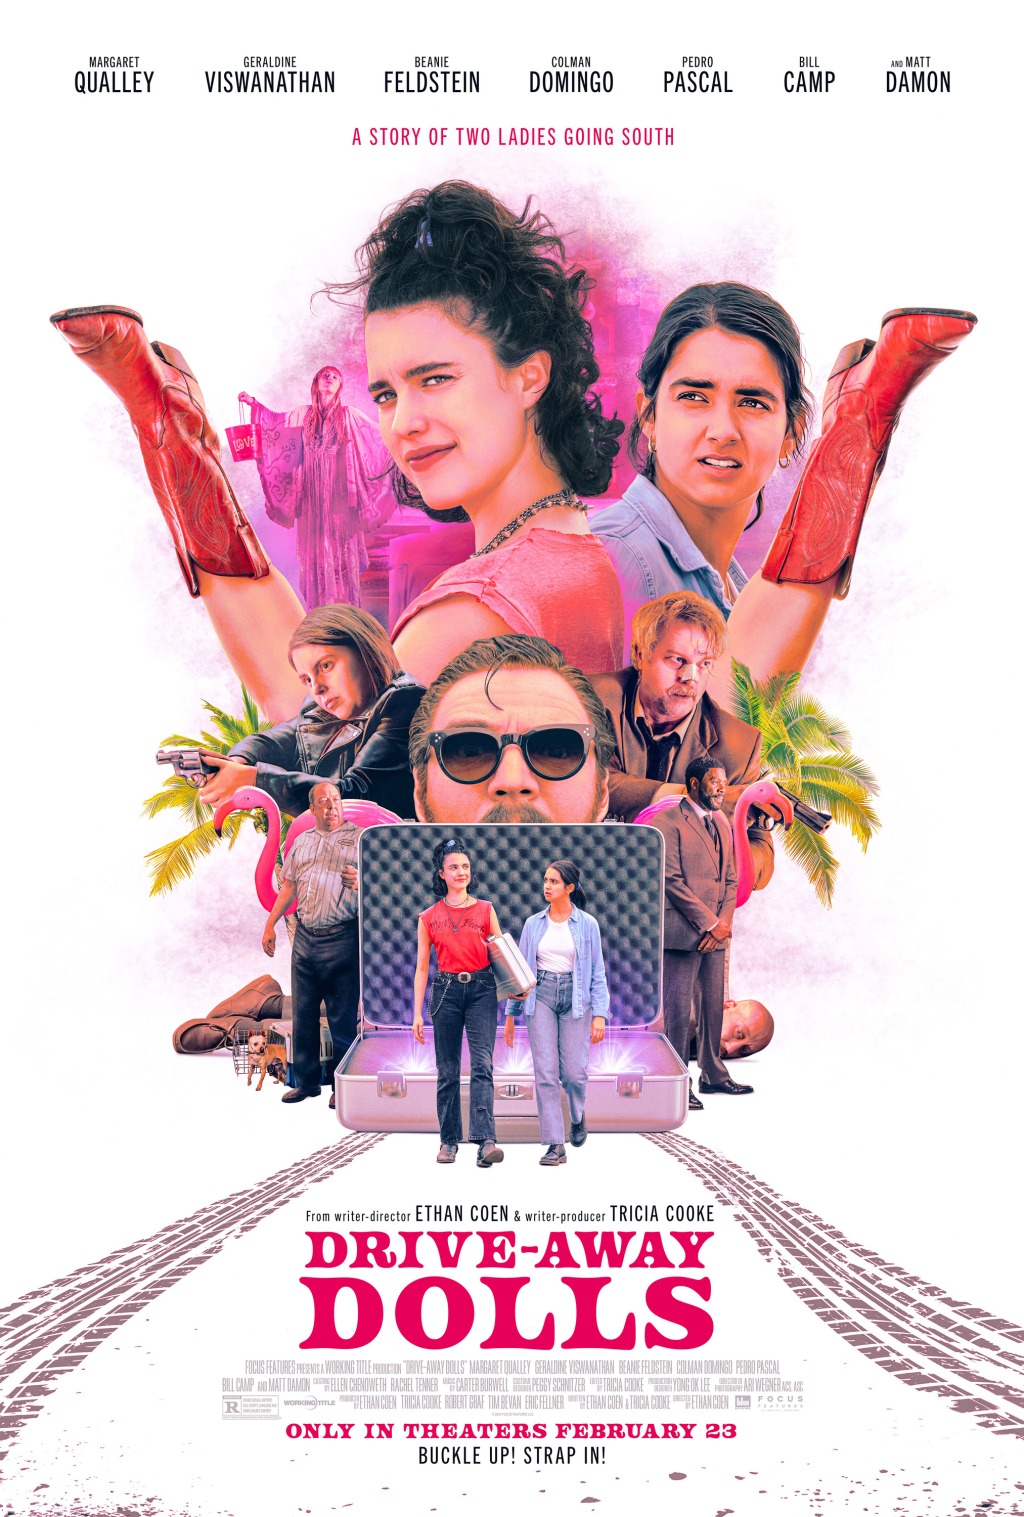 Drive-Away Dolls Review — Intriguing but forgettable